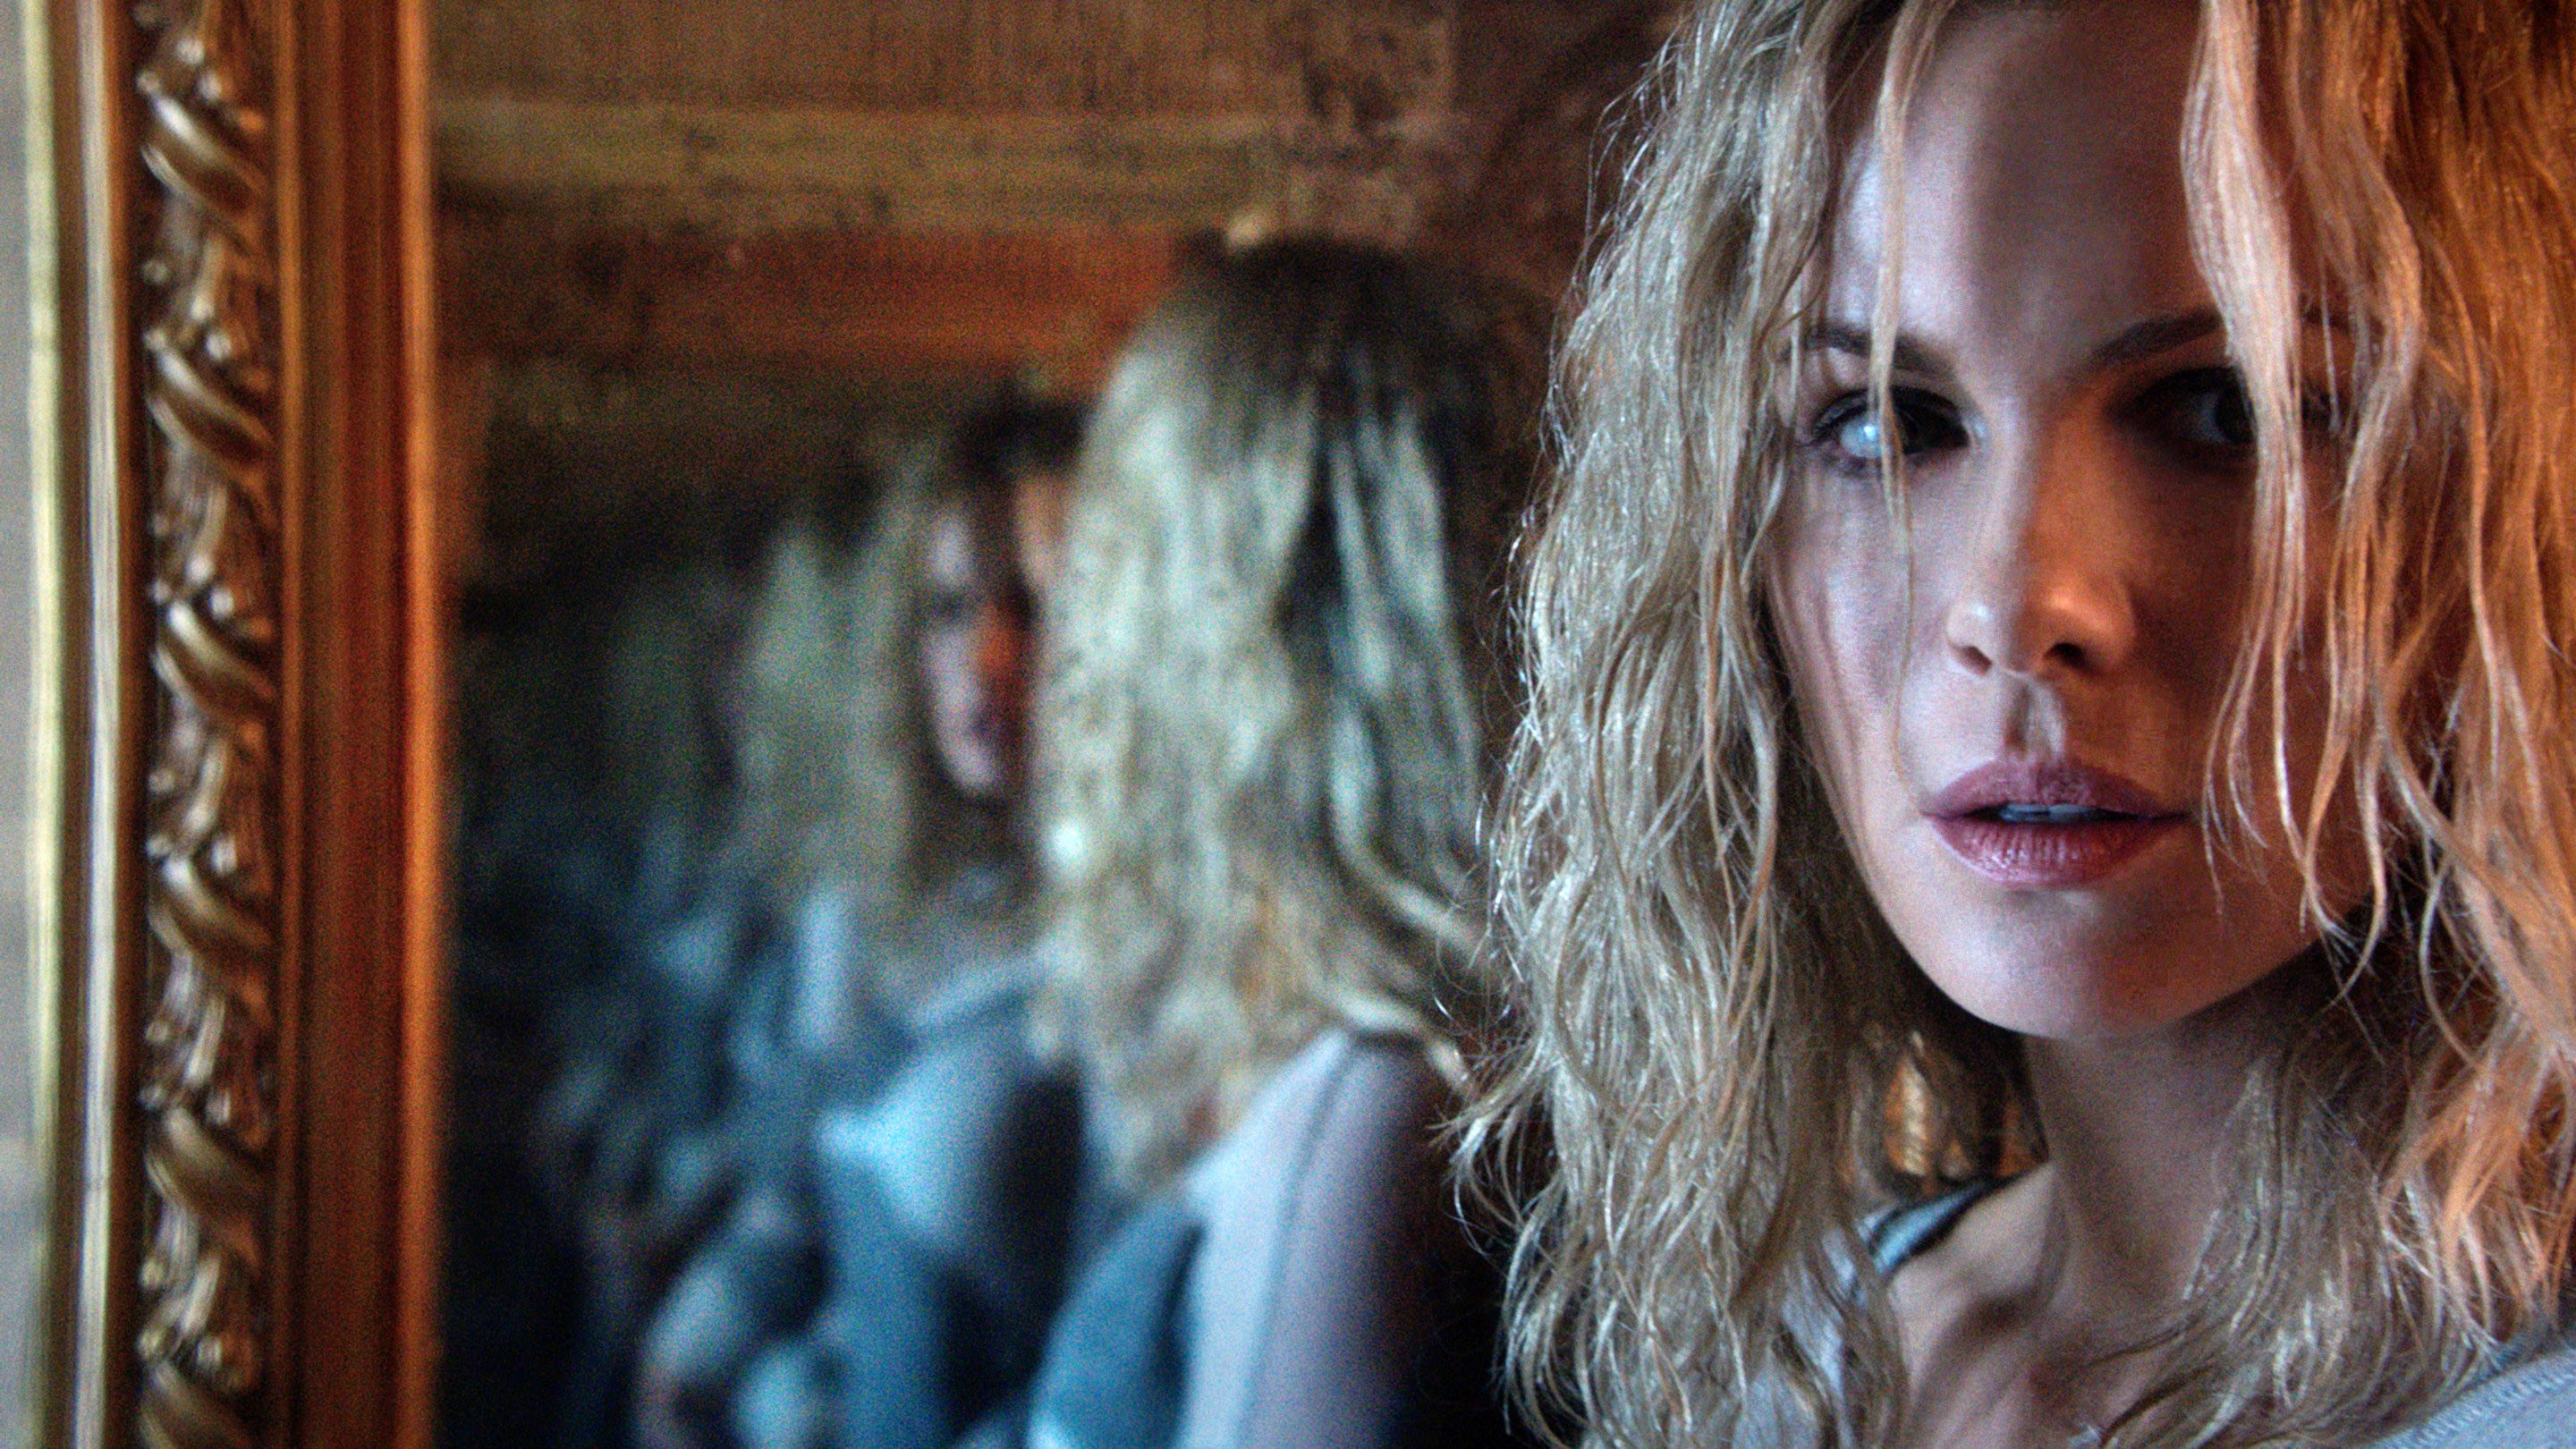 Kate Beckinsale shares a look of concern reflected in a nightmarish mirror in &quot;The Disappointments Room&quot;